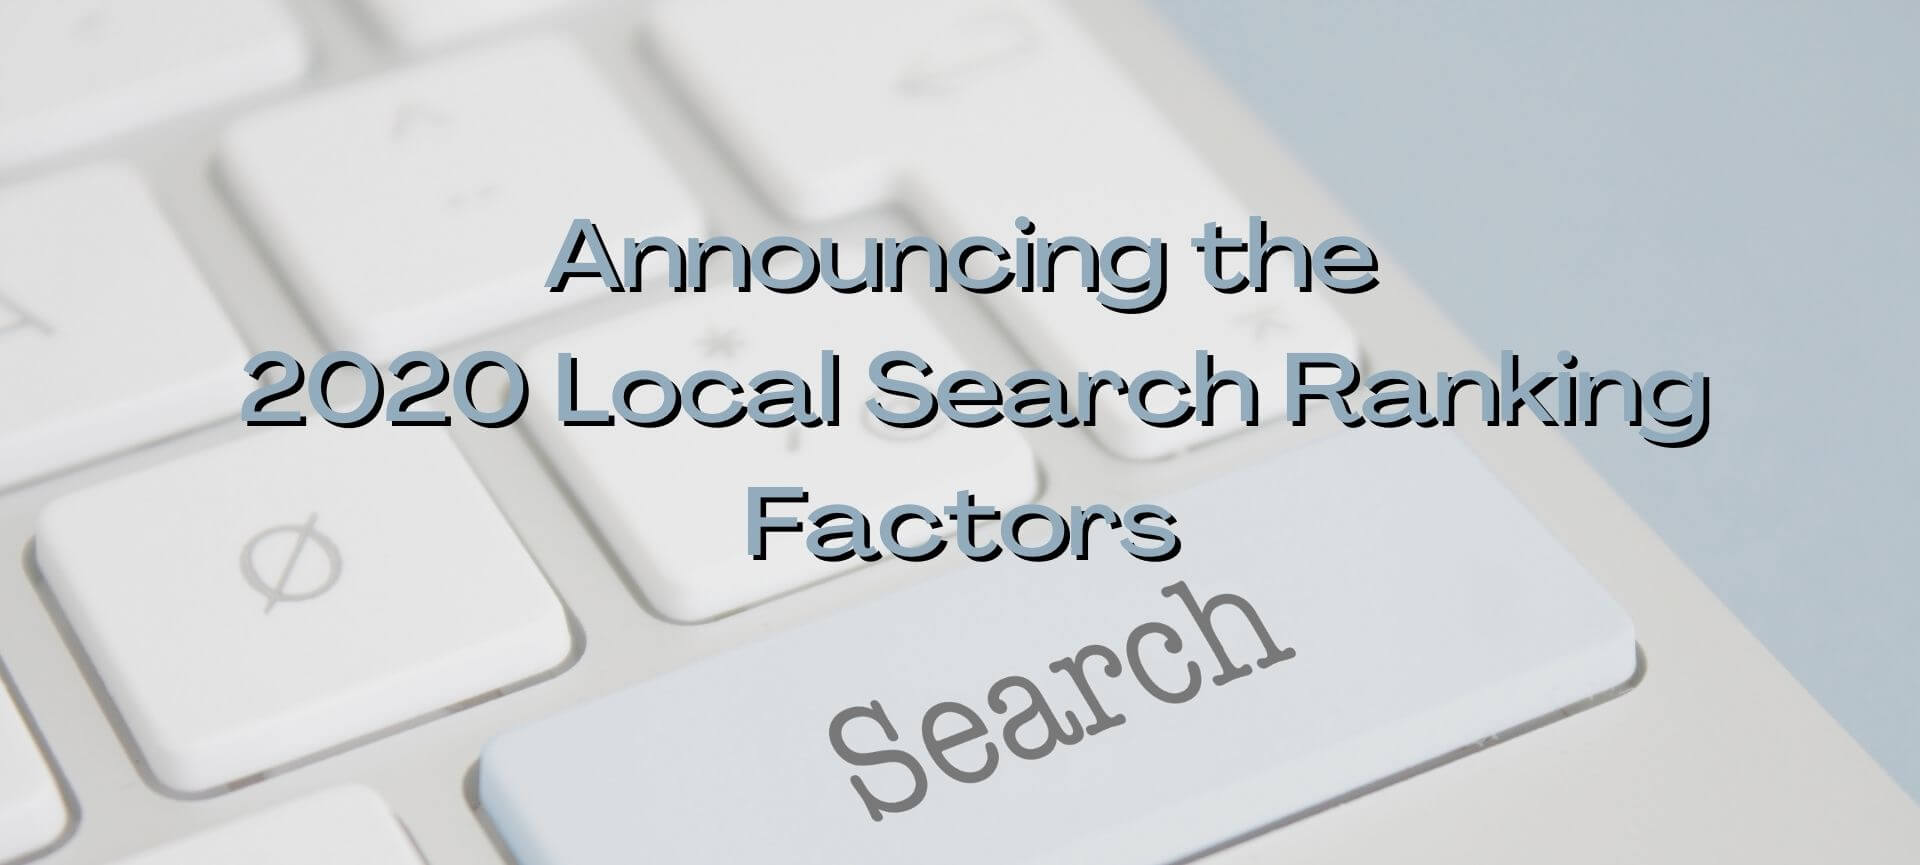 Announcing the 2020 Local Search Ranking Factors